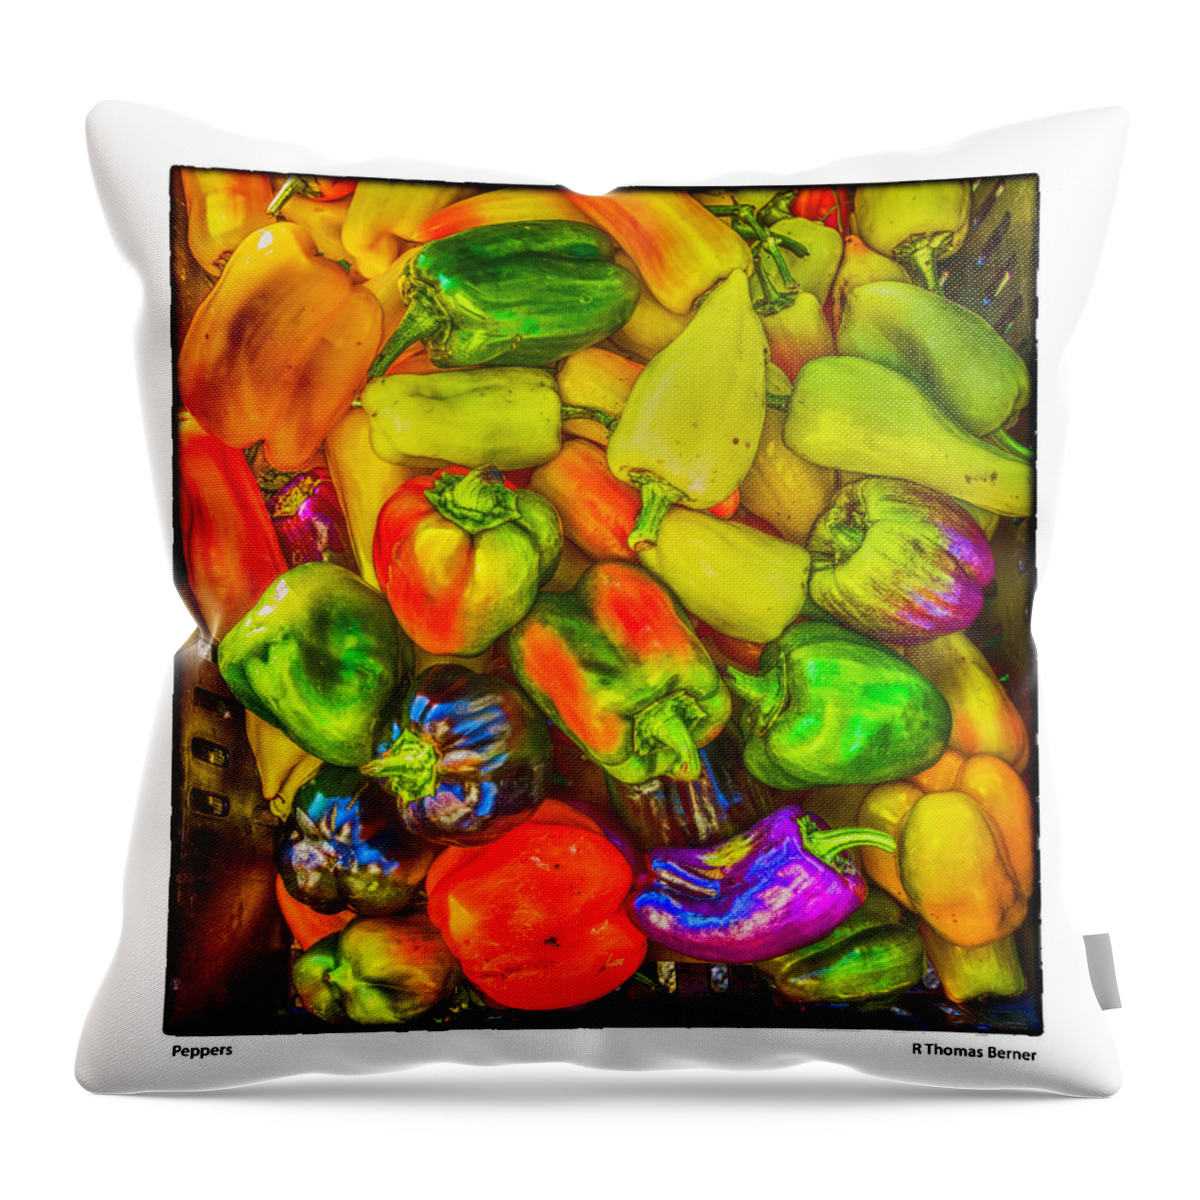 Market Throw Pillow featuring the photograph Peppers by R Thomas Berner